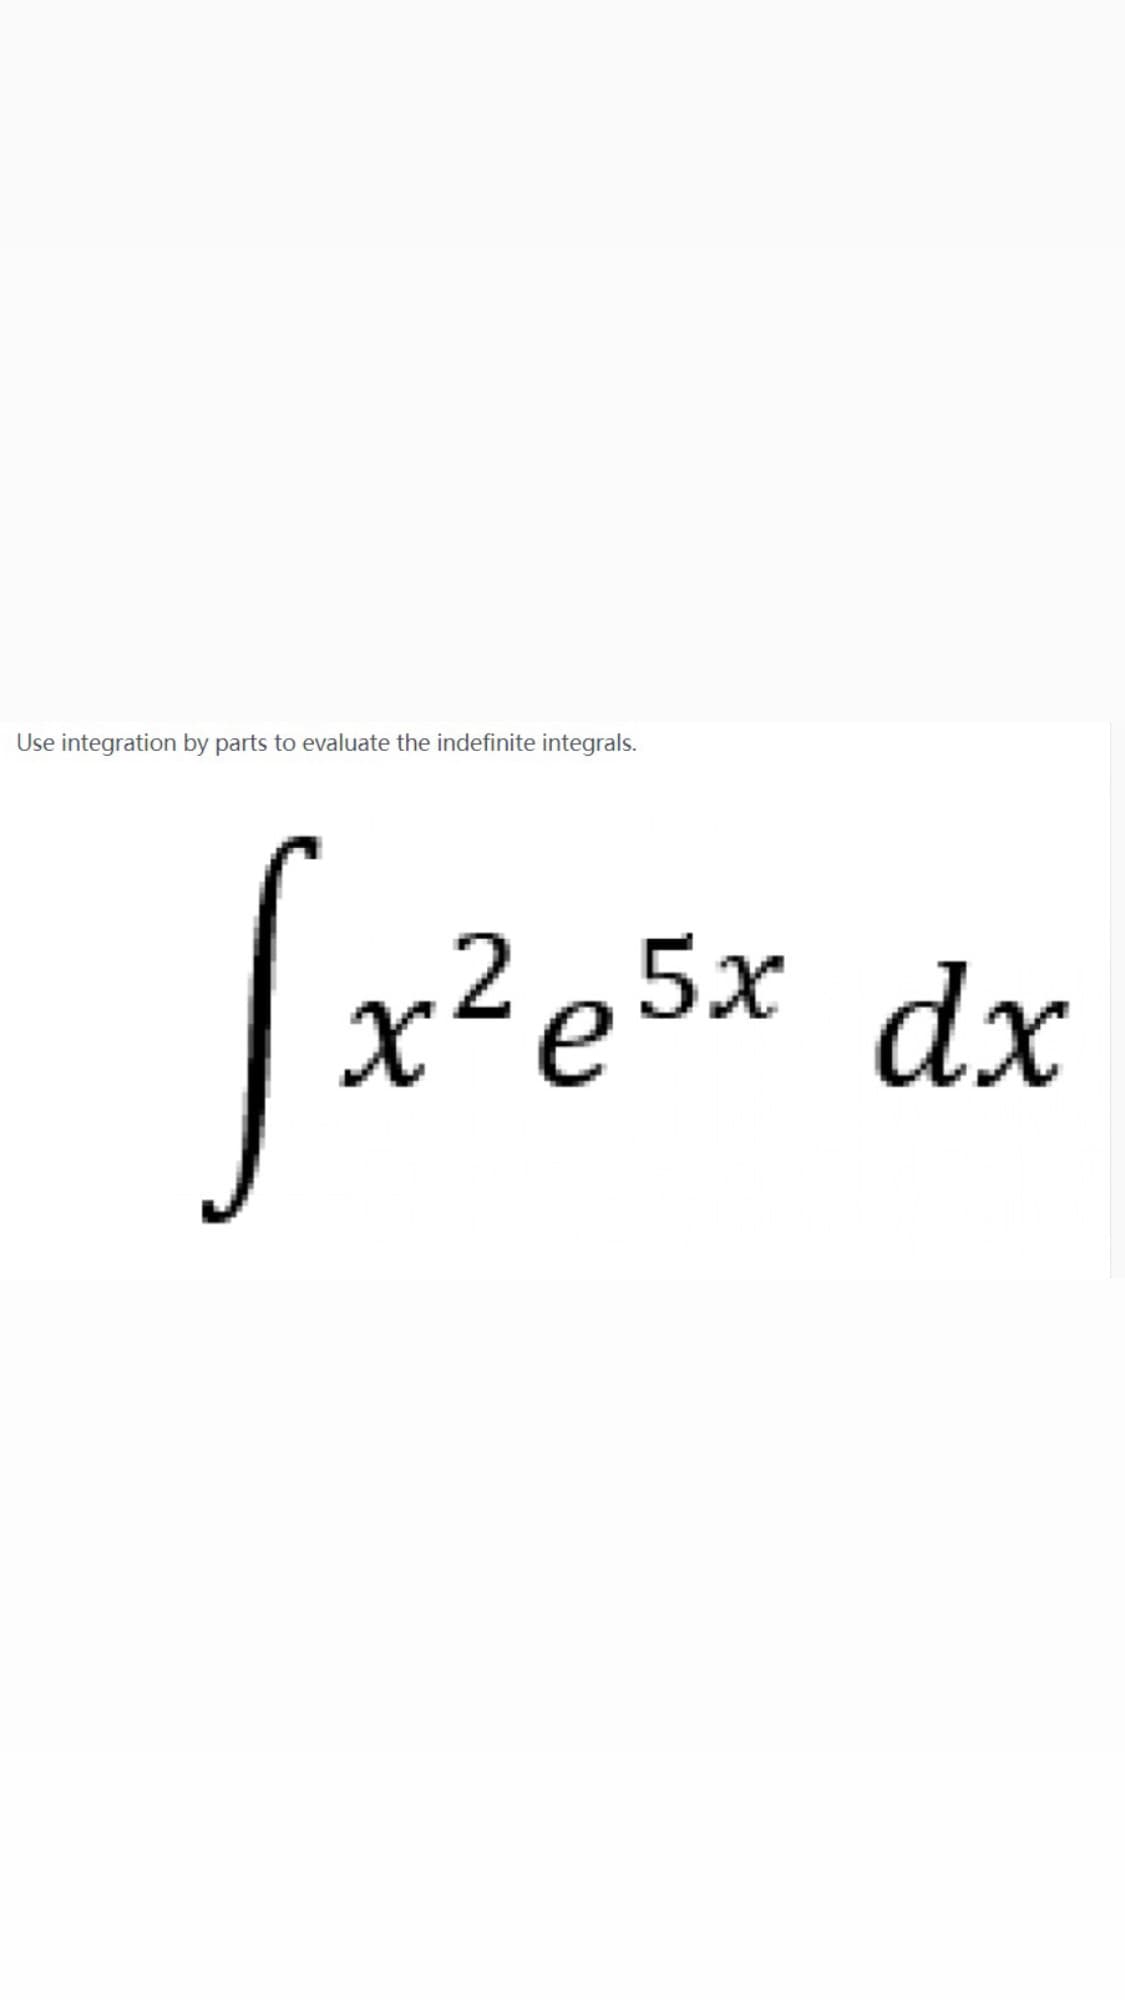 Use integration by parts to evaluate the indefinite integrals.
x²e5x dx
